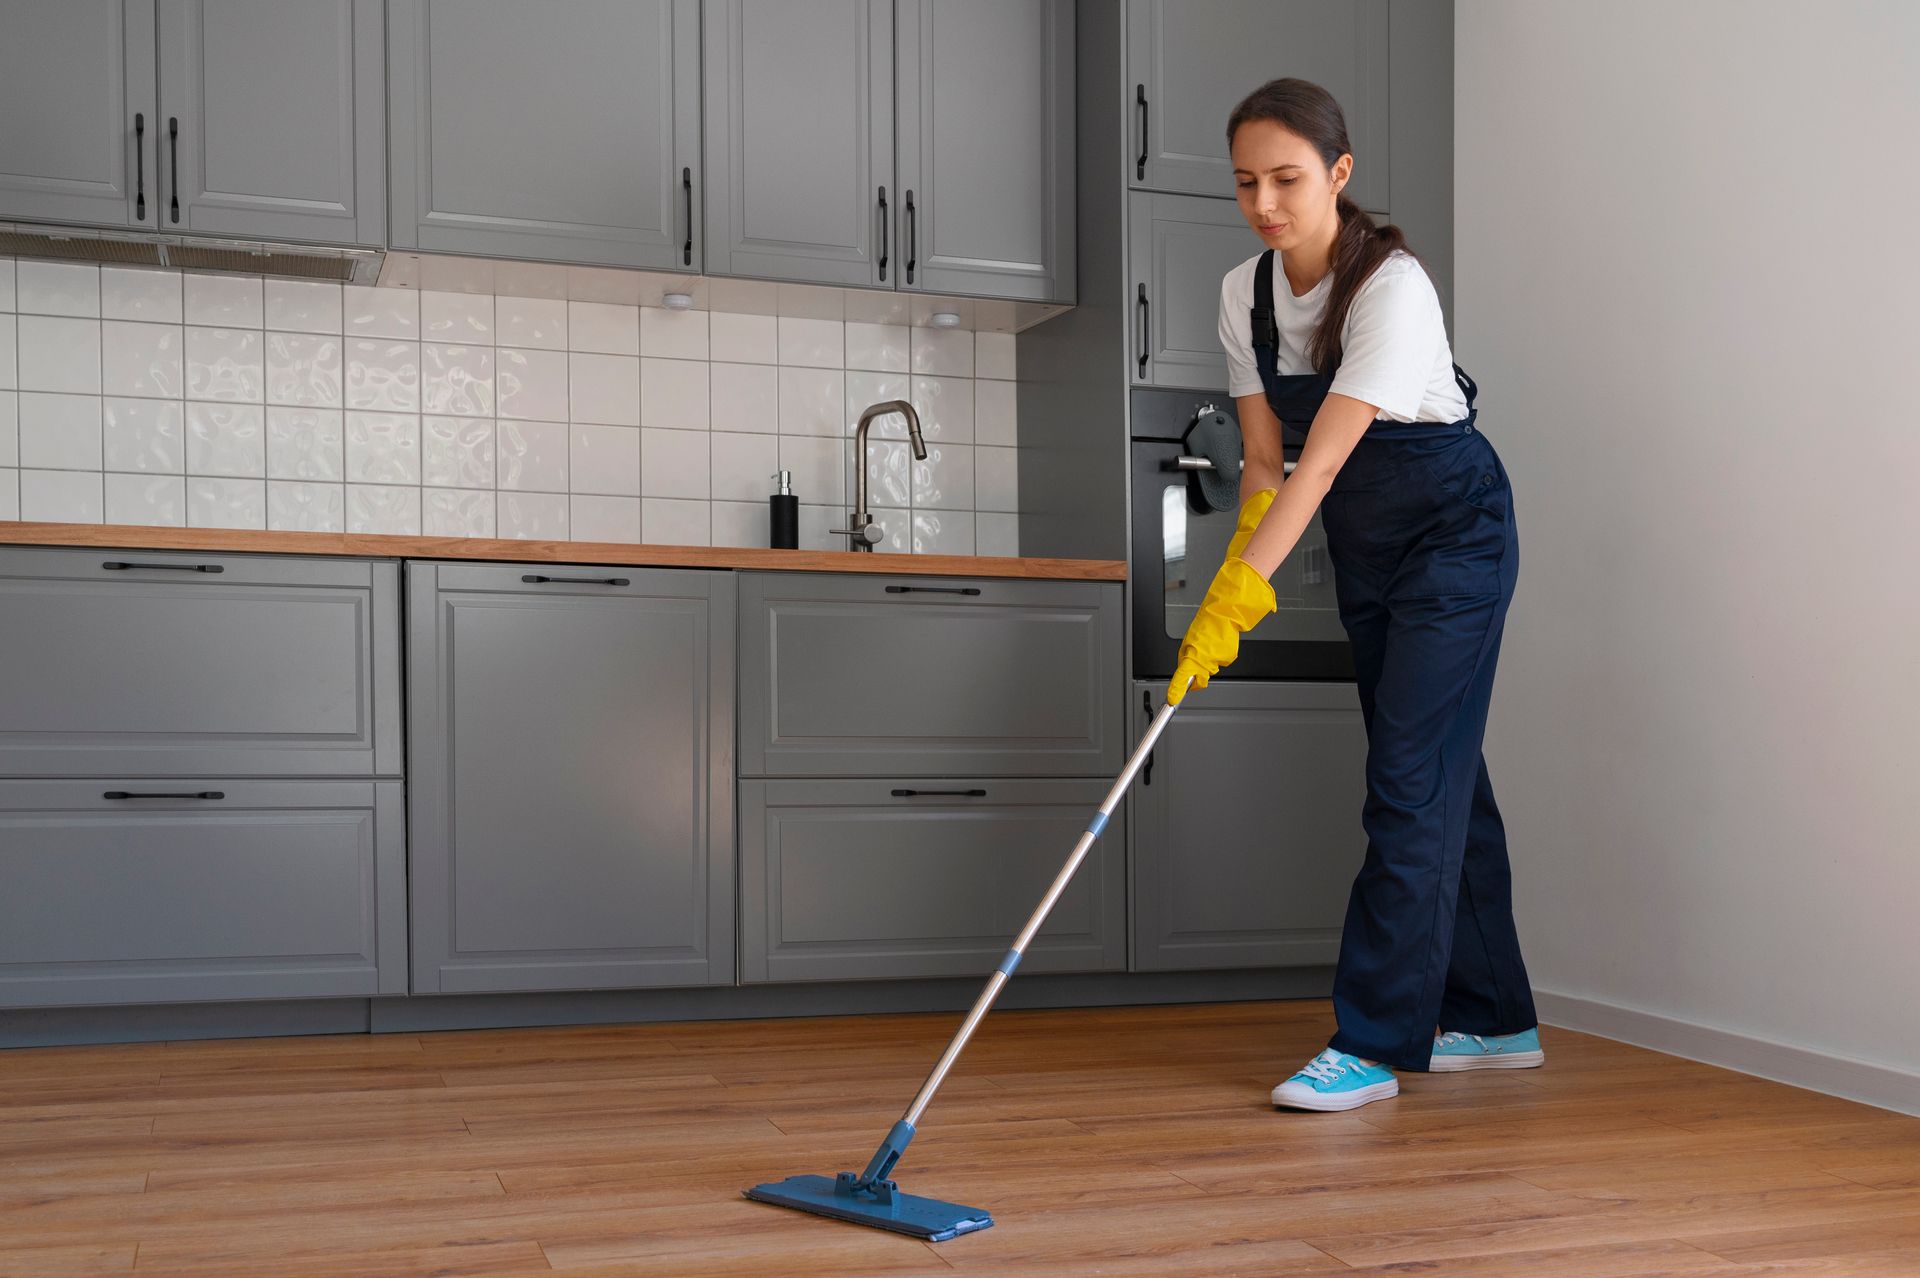 A woman is cleaning the floor in a kitchen with a mop.